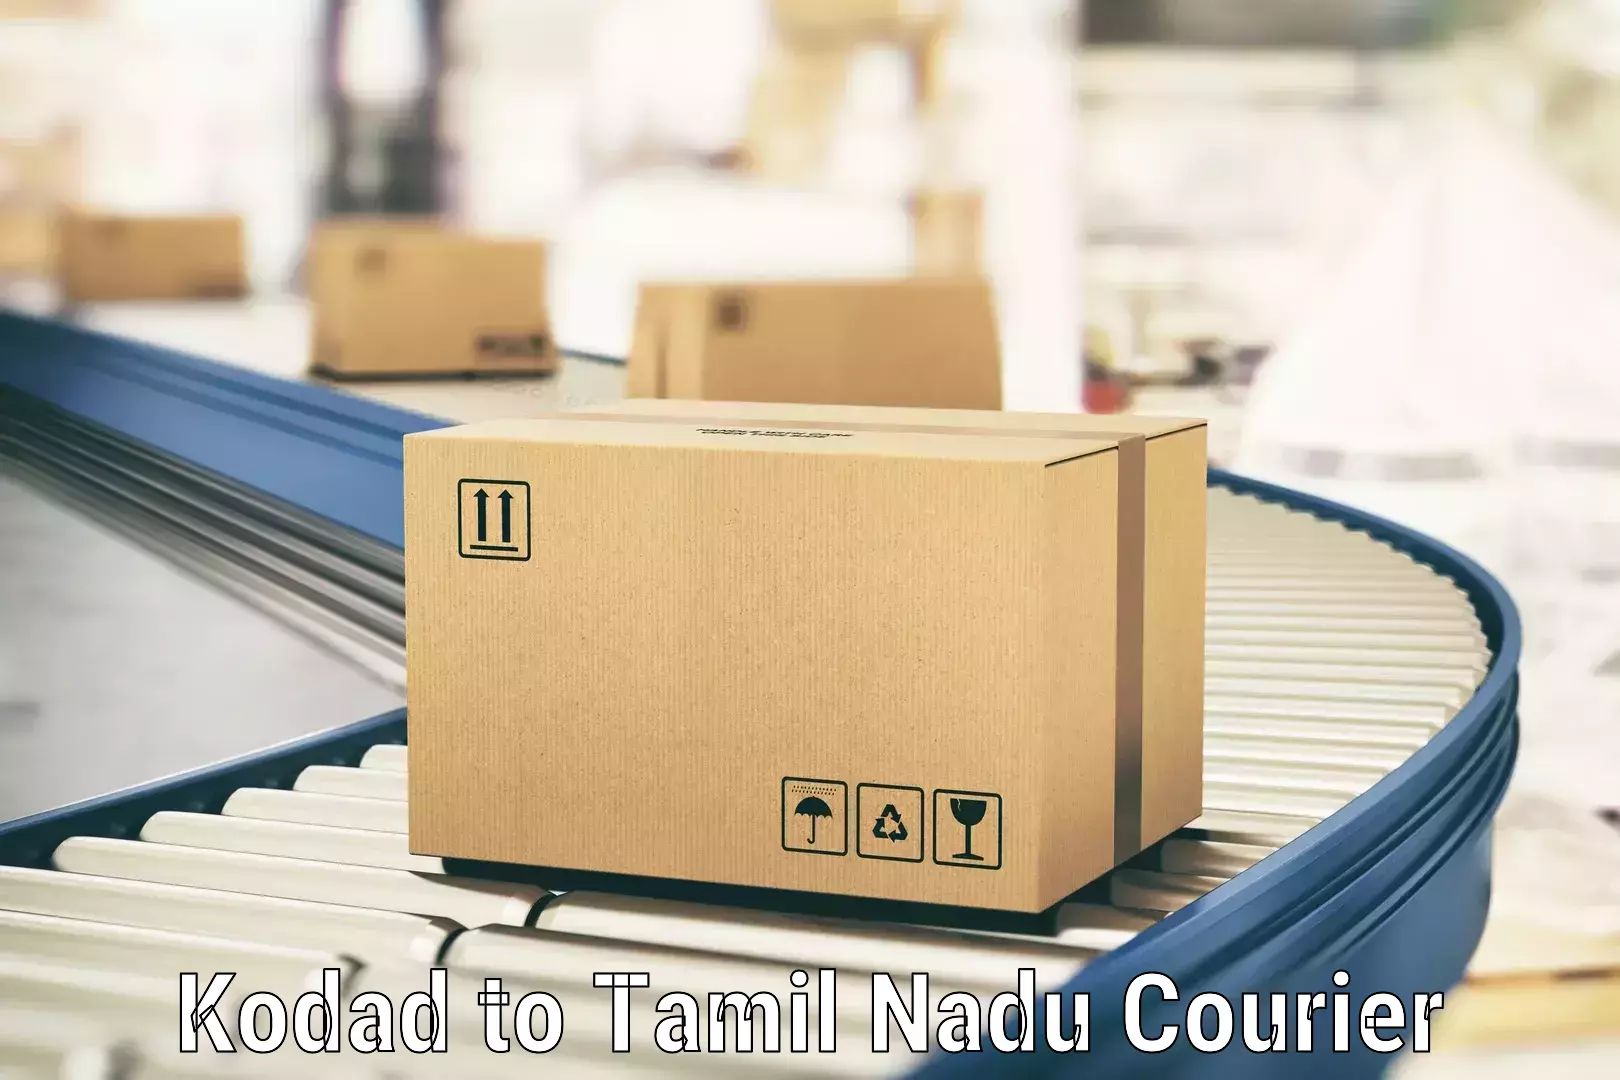 Efficient shipping operations Kodad to Vellore Institute of Technology